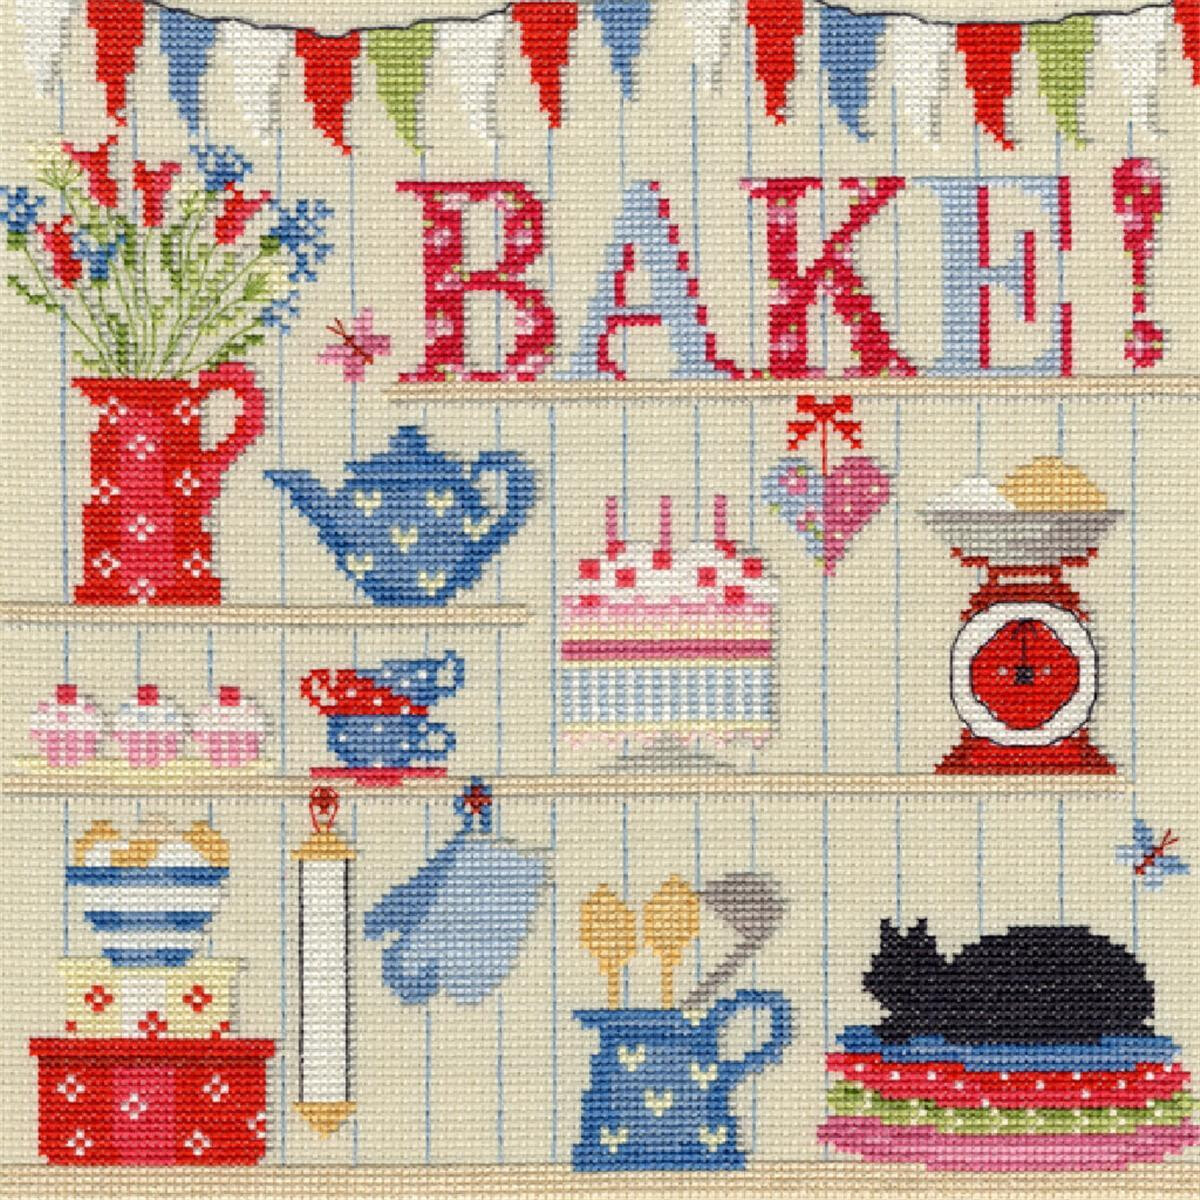 Bothy Threads counted cross stitch Kit "Bake!",...